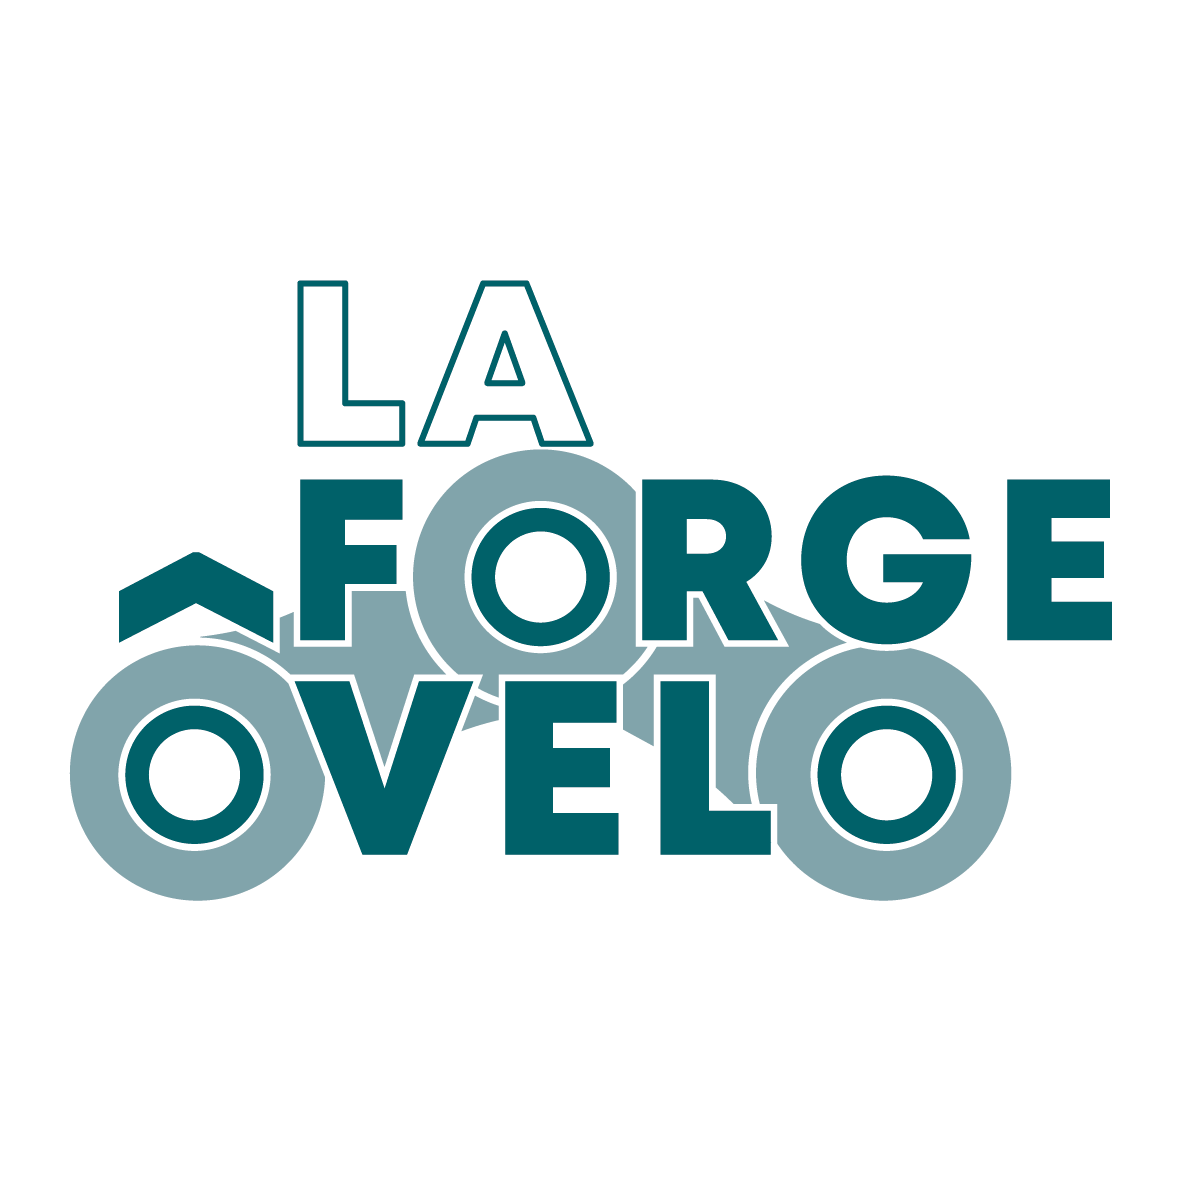 http://jurace.ch/images/upload/1713529385-LaForgeOvelo-Fondblanc-s ..png